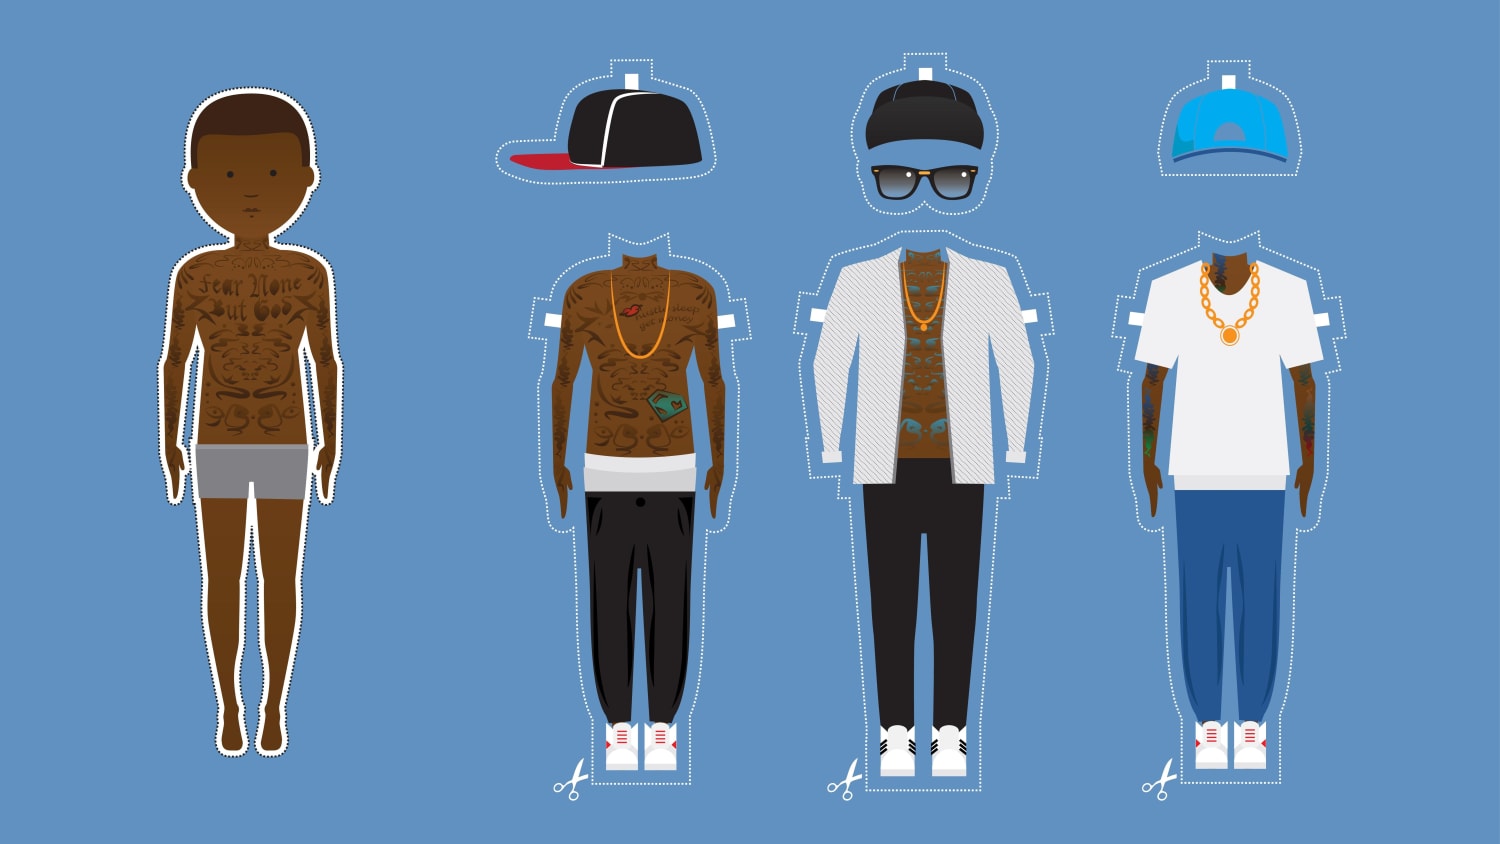 Types of hip-hop: Guide to the different styles of rap